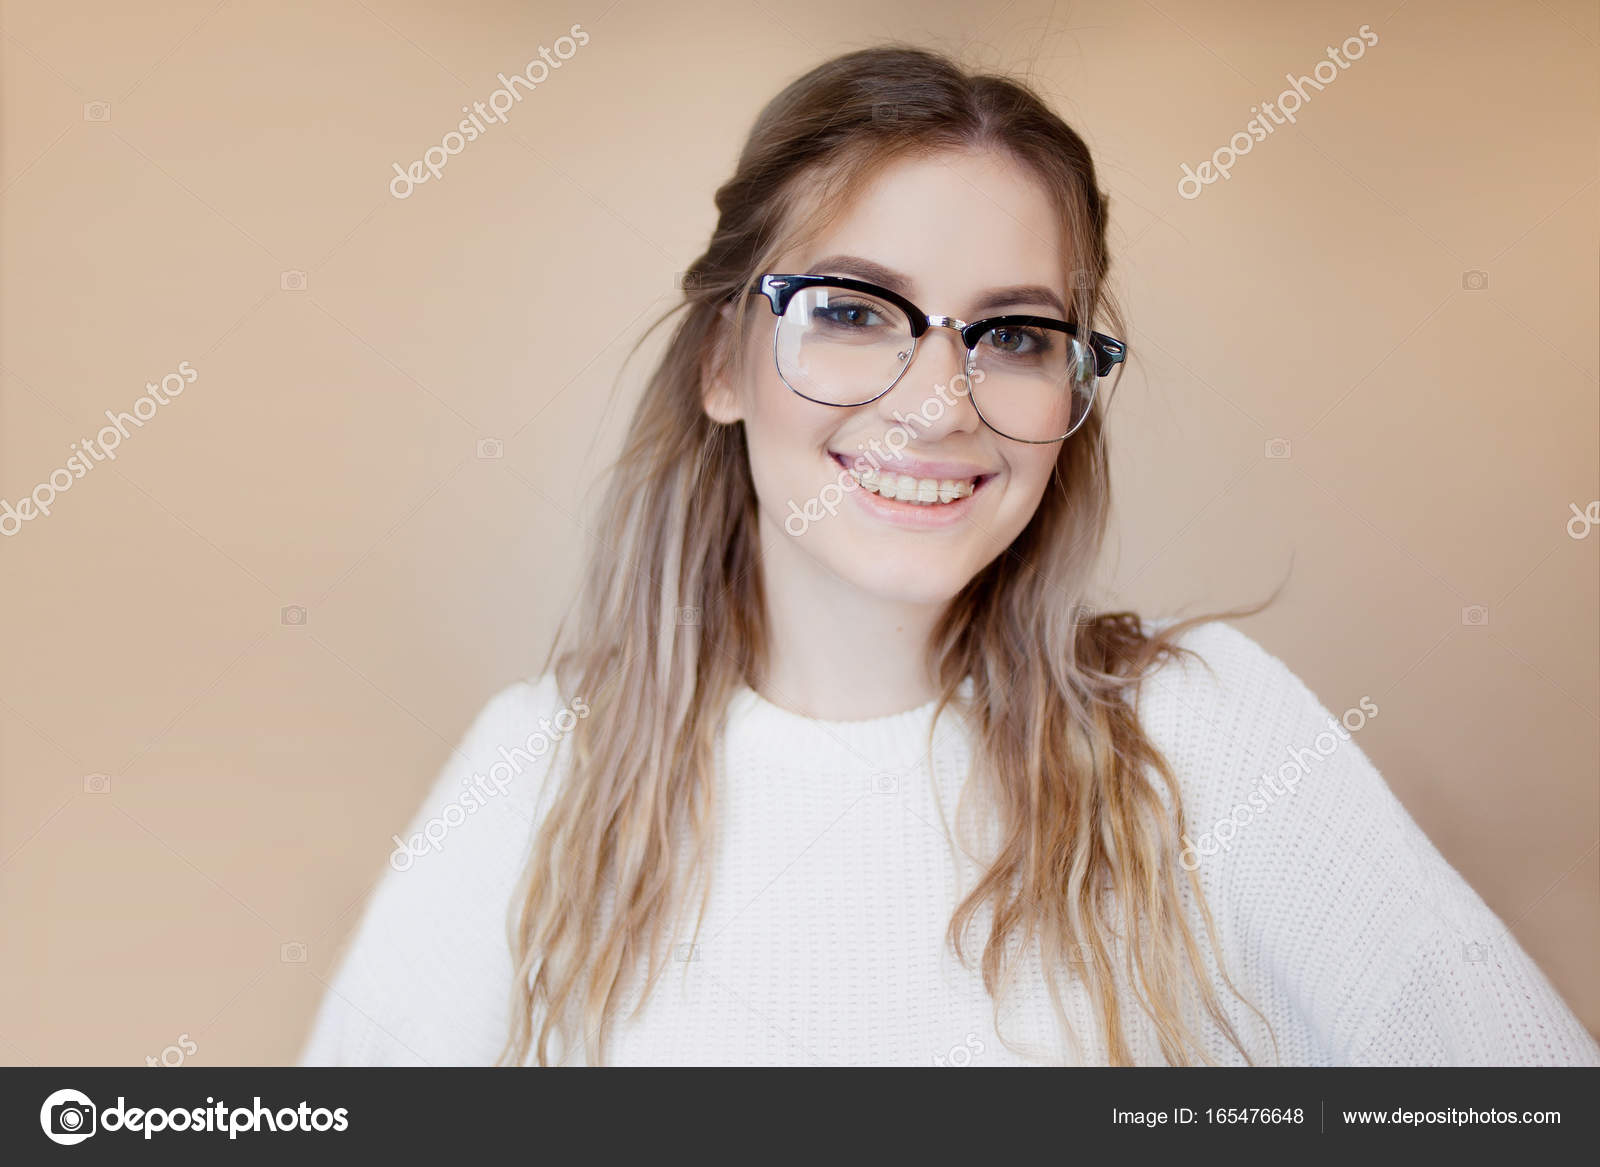 Happy and beautiful girl with glasses and braces. Young woman smiling —  Stock Photo © KrisCole #165476648